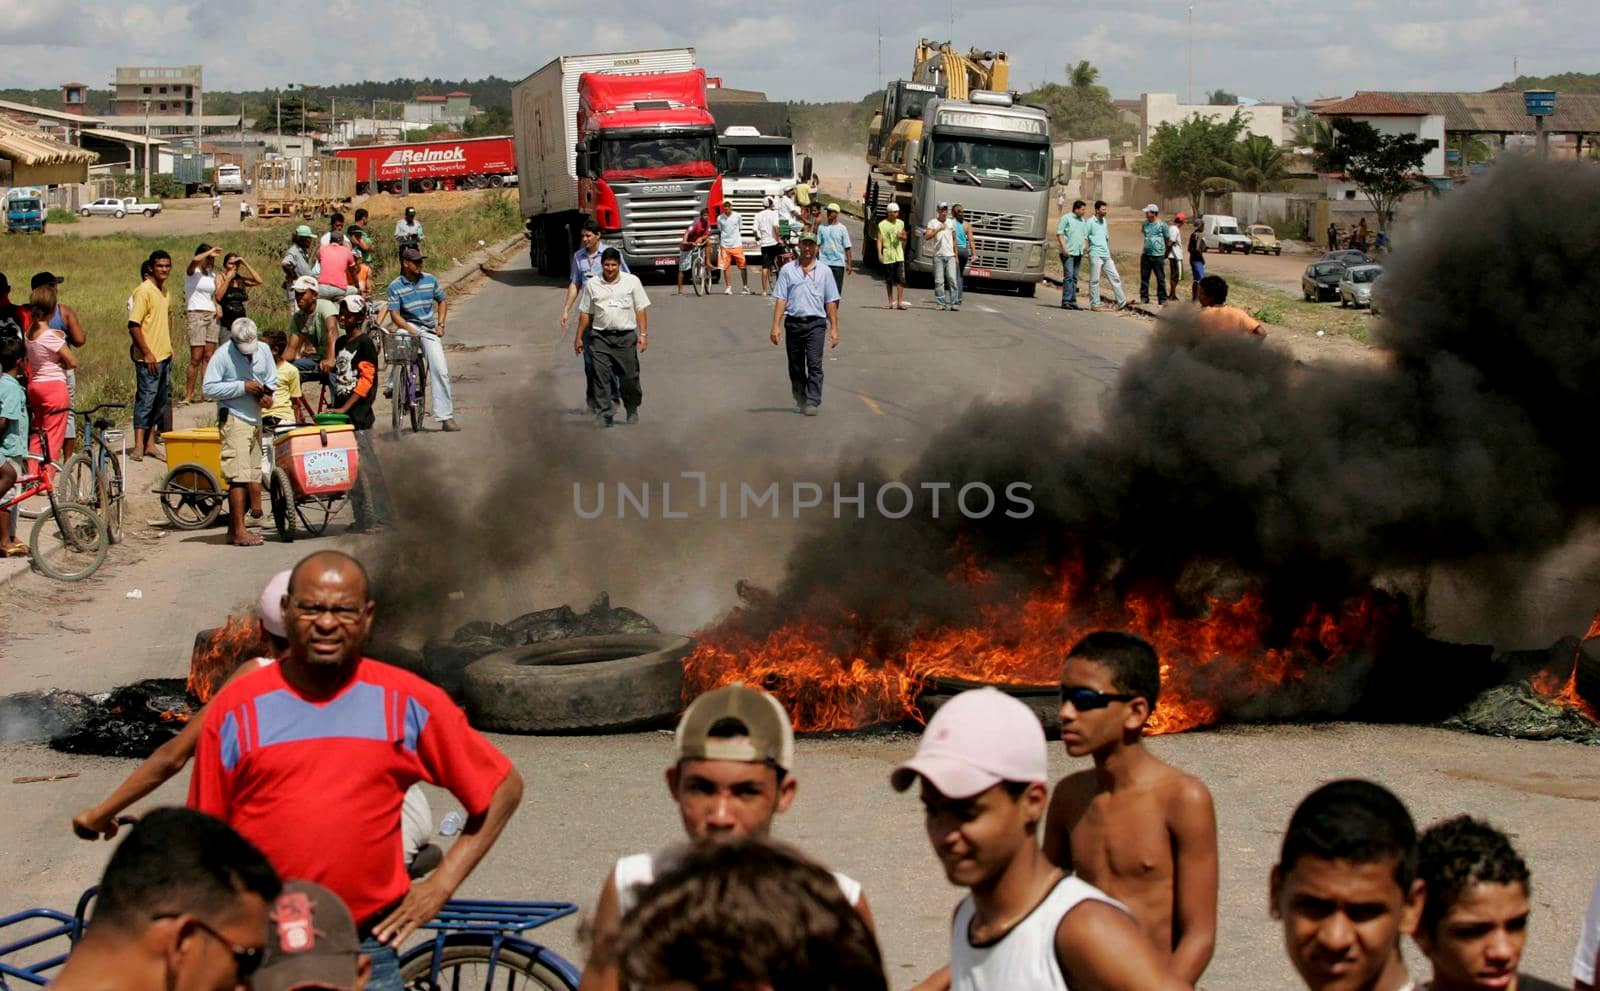 highway ban due to protest by joasouza